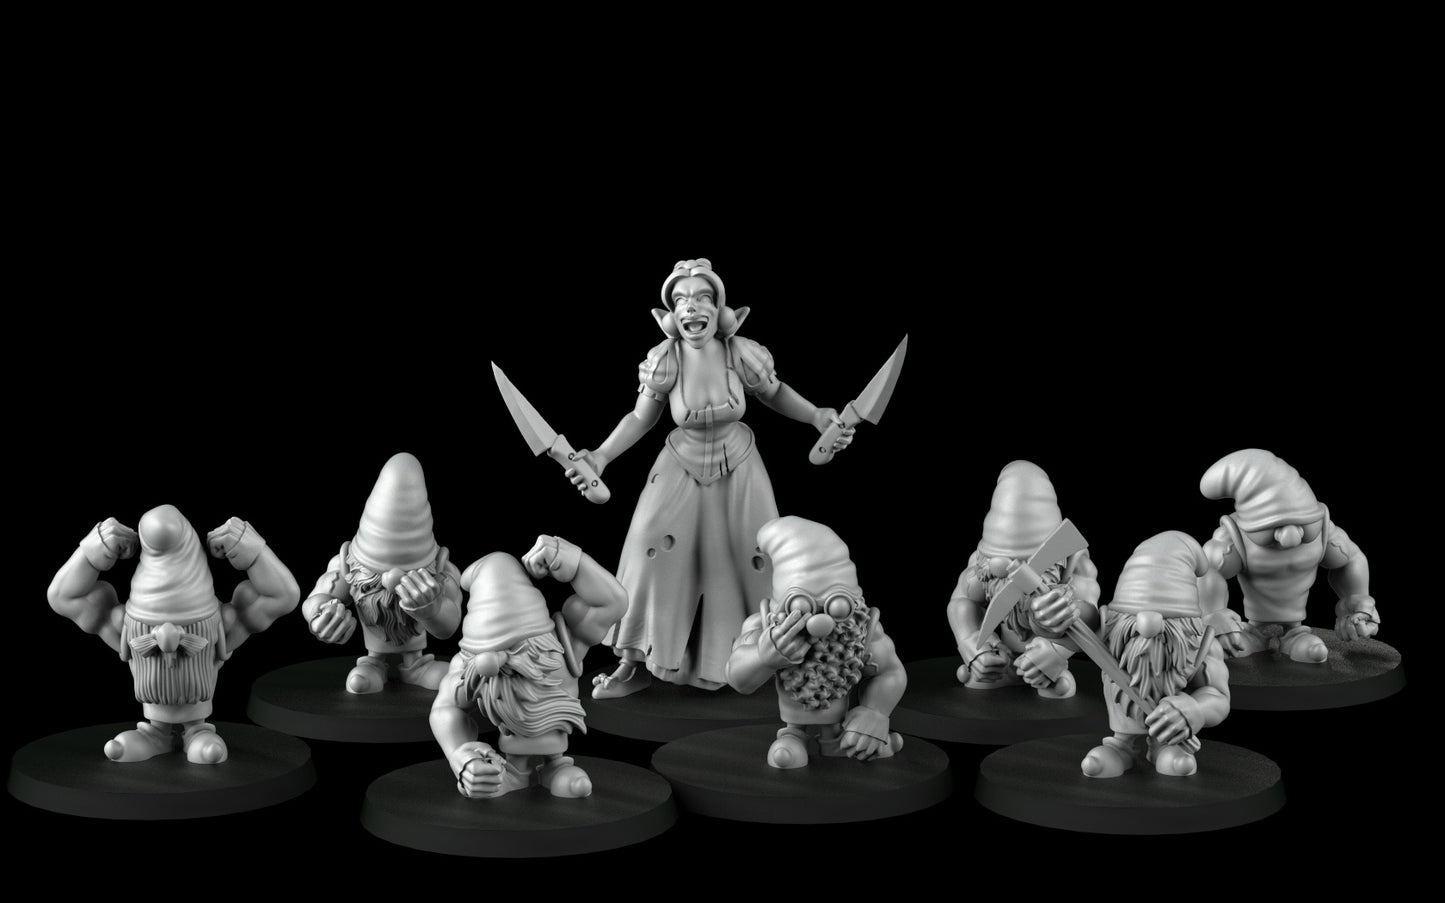 Gnome/Dwarf Fantasy Football Team Led by Snow White by Crosslances Miniatures for Tabletop Games, Dioramas and Statues